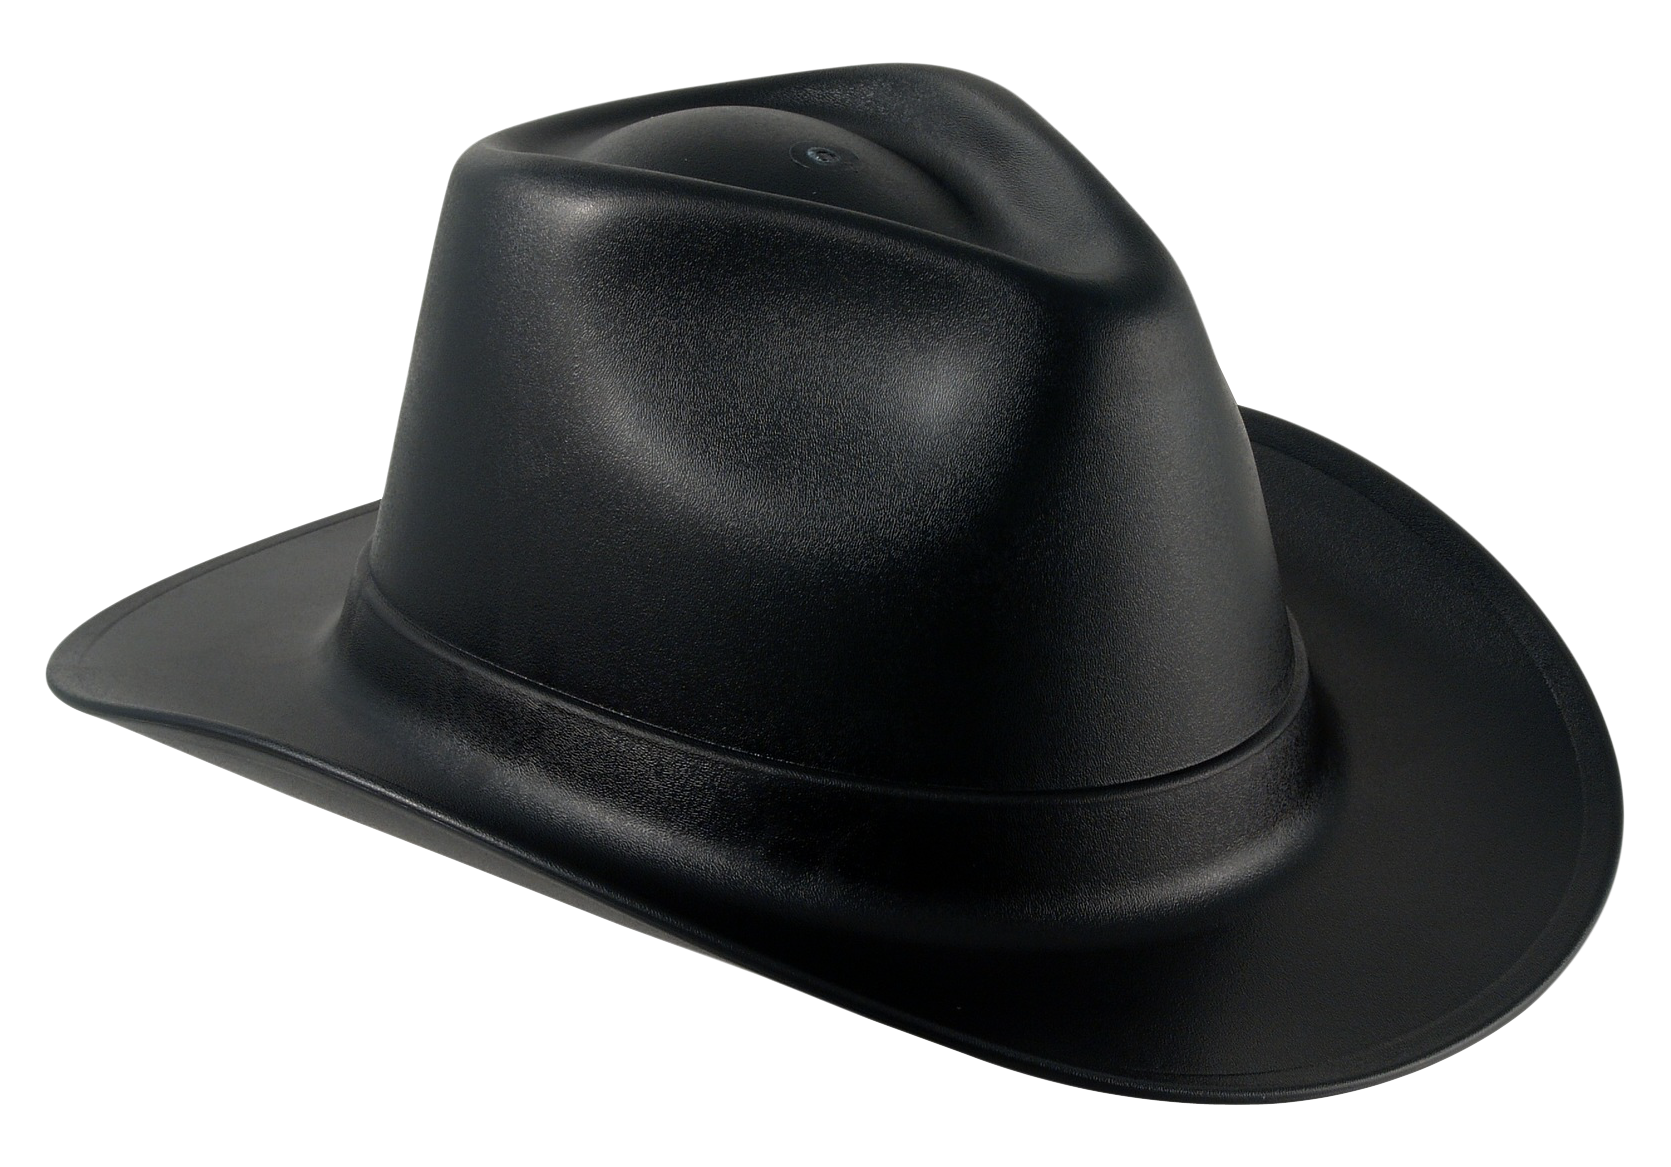 Hat Western Cowboy Free Clipart HQ PNG Image